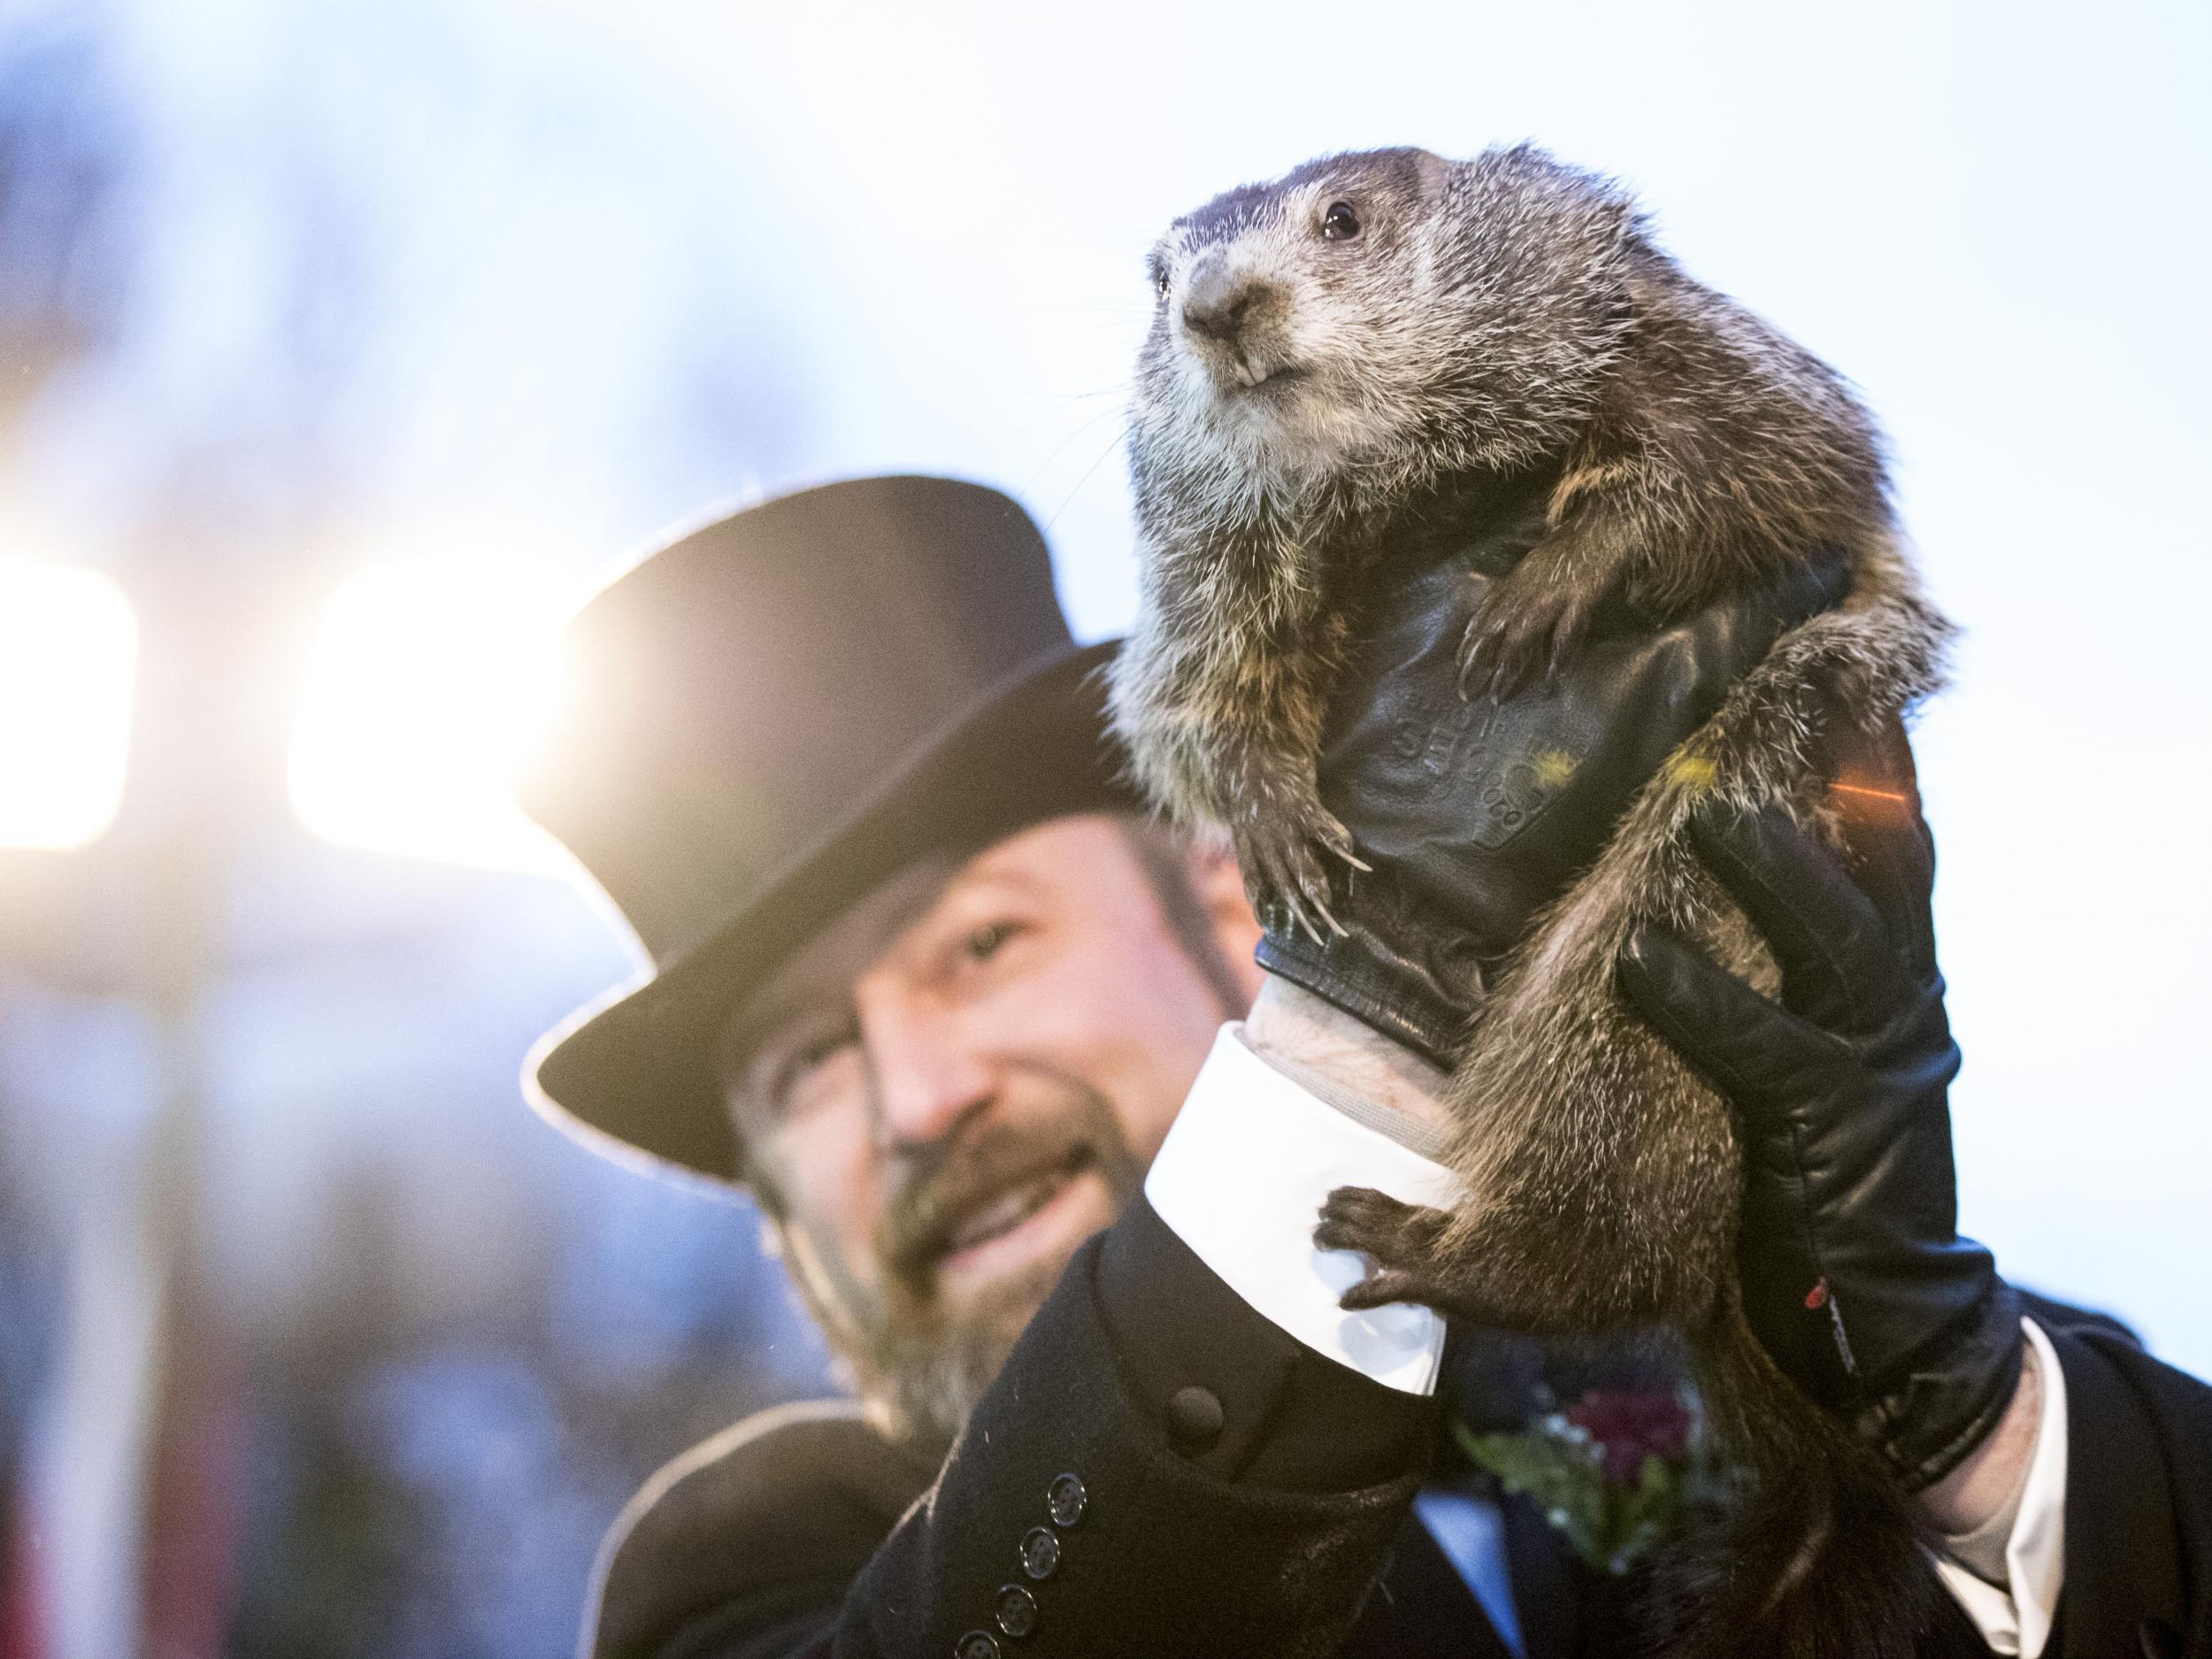 Punxsutawney Phil is held up by his handler for the crowd to see during the ceremonies for Groundhog day on February 2, 2018 in Punxsutawney, Pennsylvania